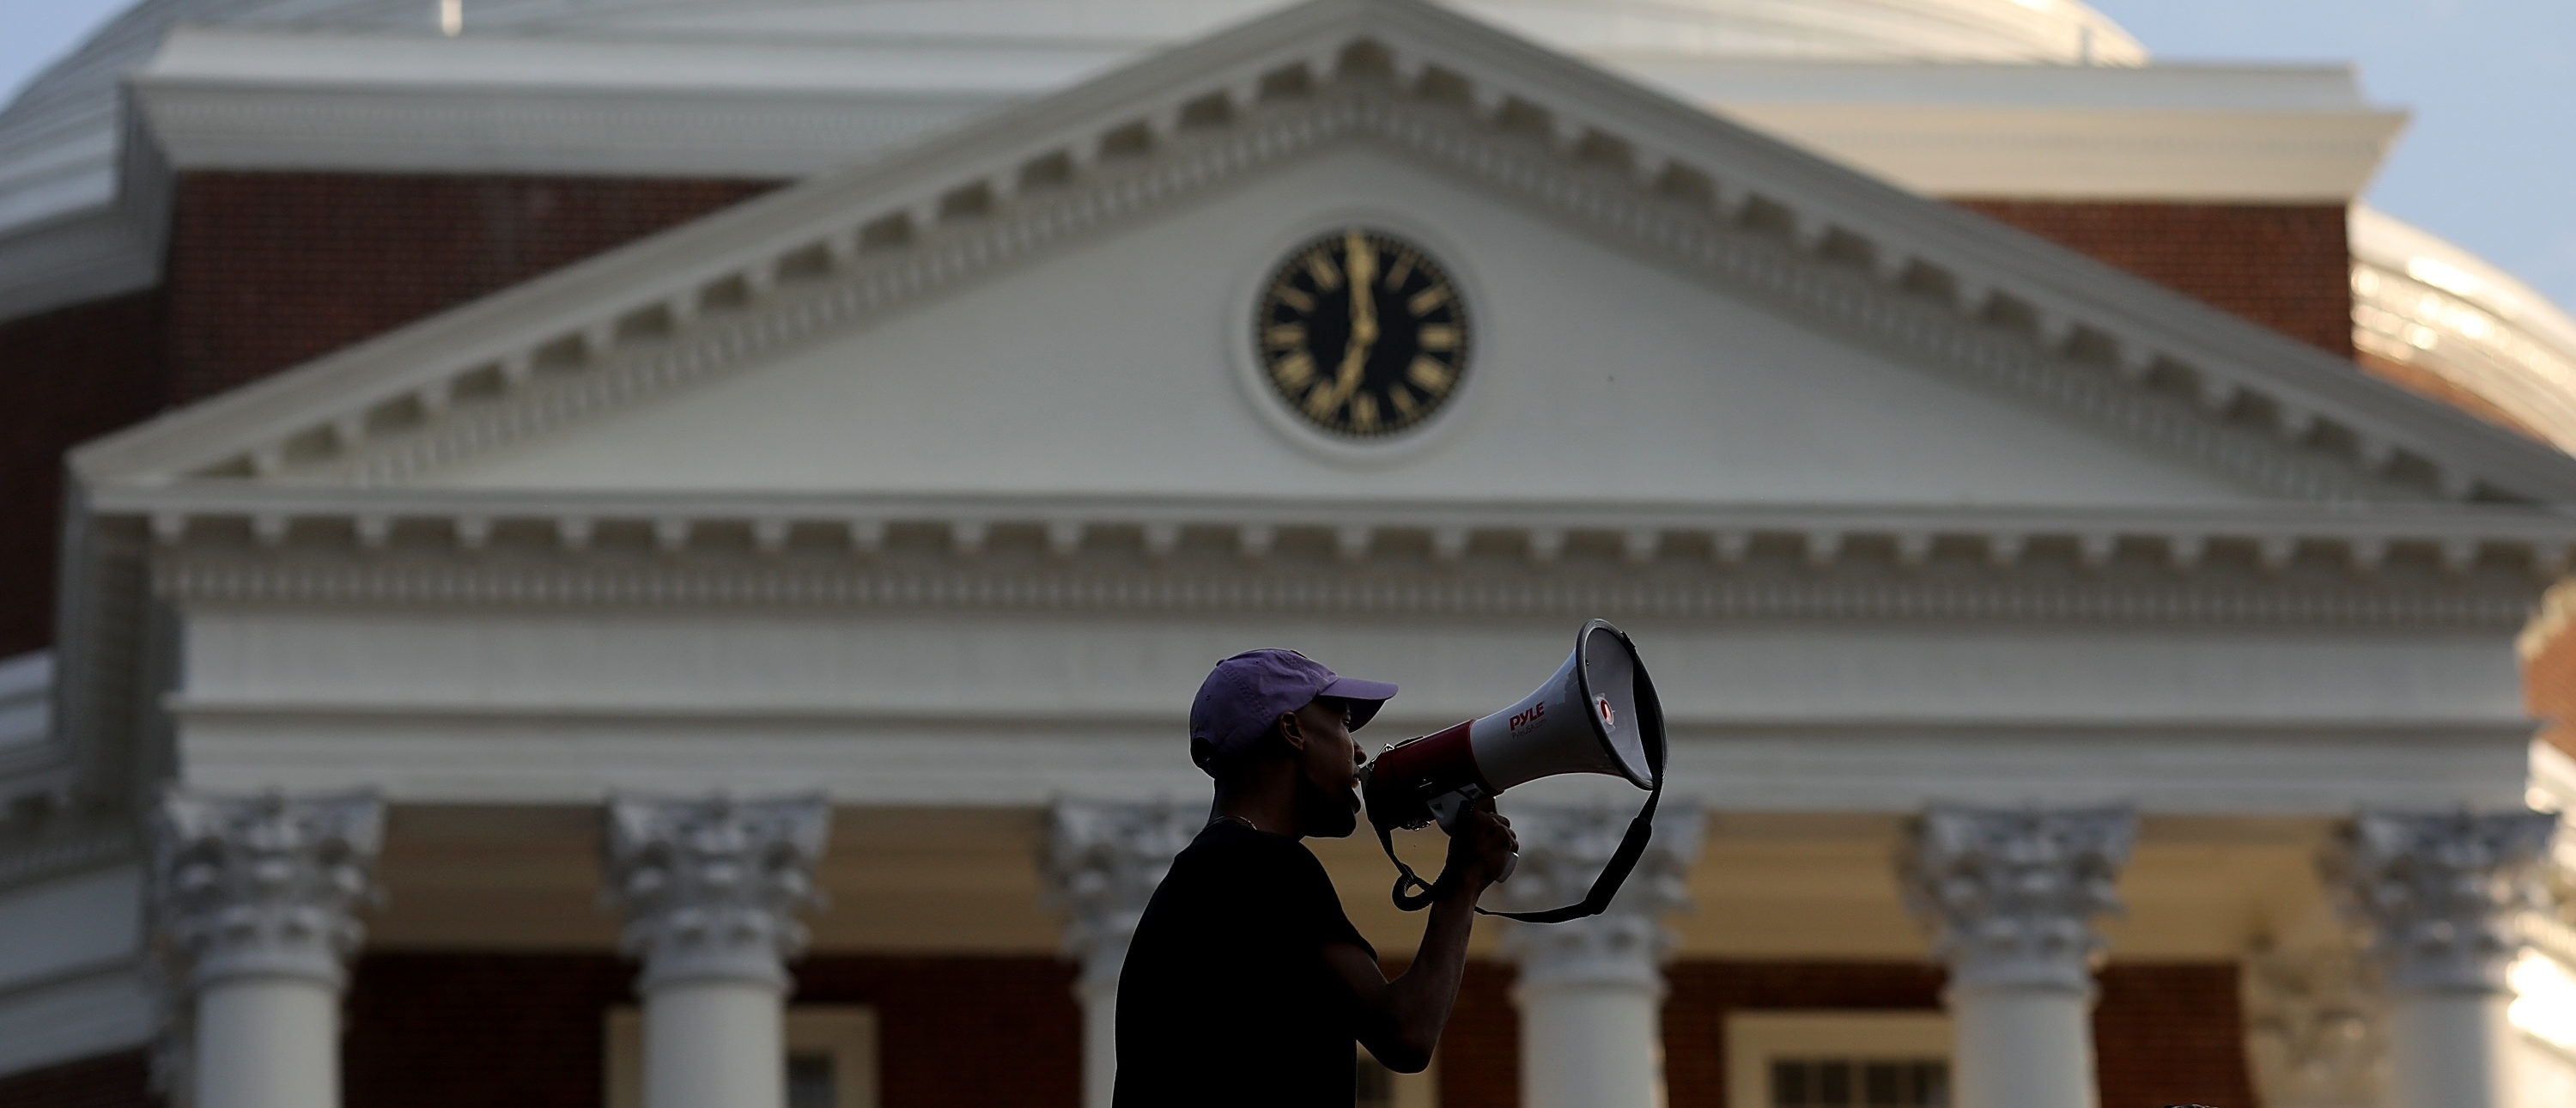 CHARLOTTESVILLE, VA - AUGUST 11: Protesters with the group Students Act Against White Supremacy speak on the campus of the University of Virginia during an event marking the one year anniversary of a deadly clash between white supremacists and counter protesters August 11, 2018 in Charlottesville, Virginia. Charlottesville has been declared in a state of emergency by Virginia Gov. Ralph Northam as the city braces for the one year anniversary of the deadly clash between white supremacist forces and counter protesters over the potential removal of Confederate statues of Robert E. Lee and Stonewall Jackson. A ÒUnite the RightÓ rally featuring some of the same groups is planned for tomorrow in Washington, DC. (Photo by Win McNamee/Getty Images)